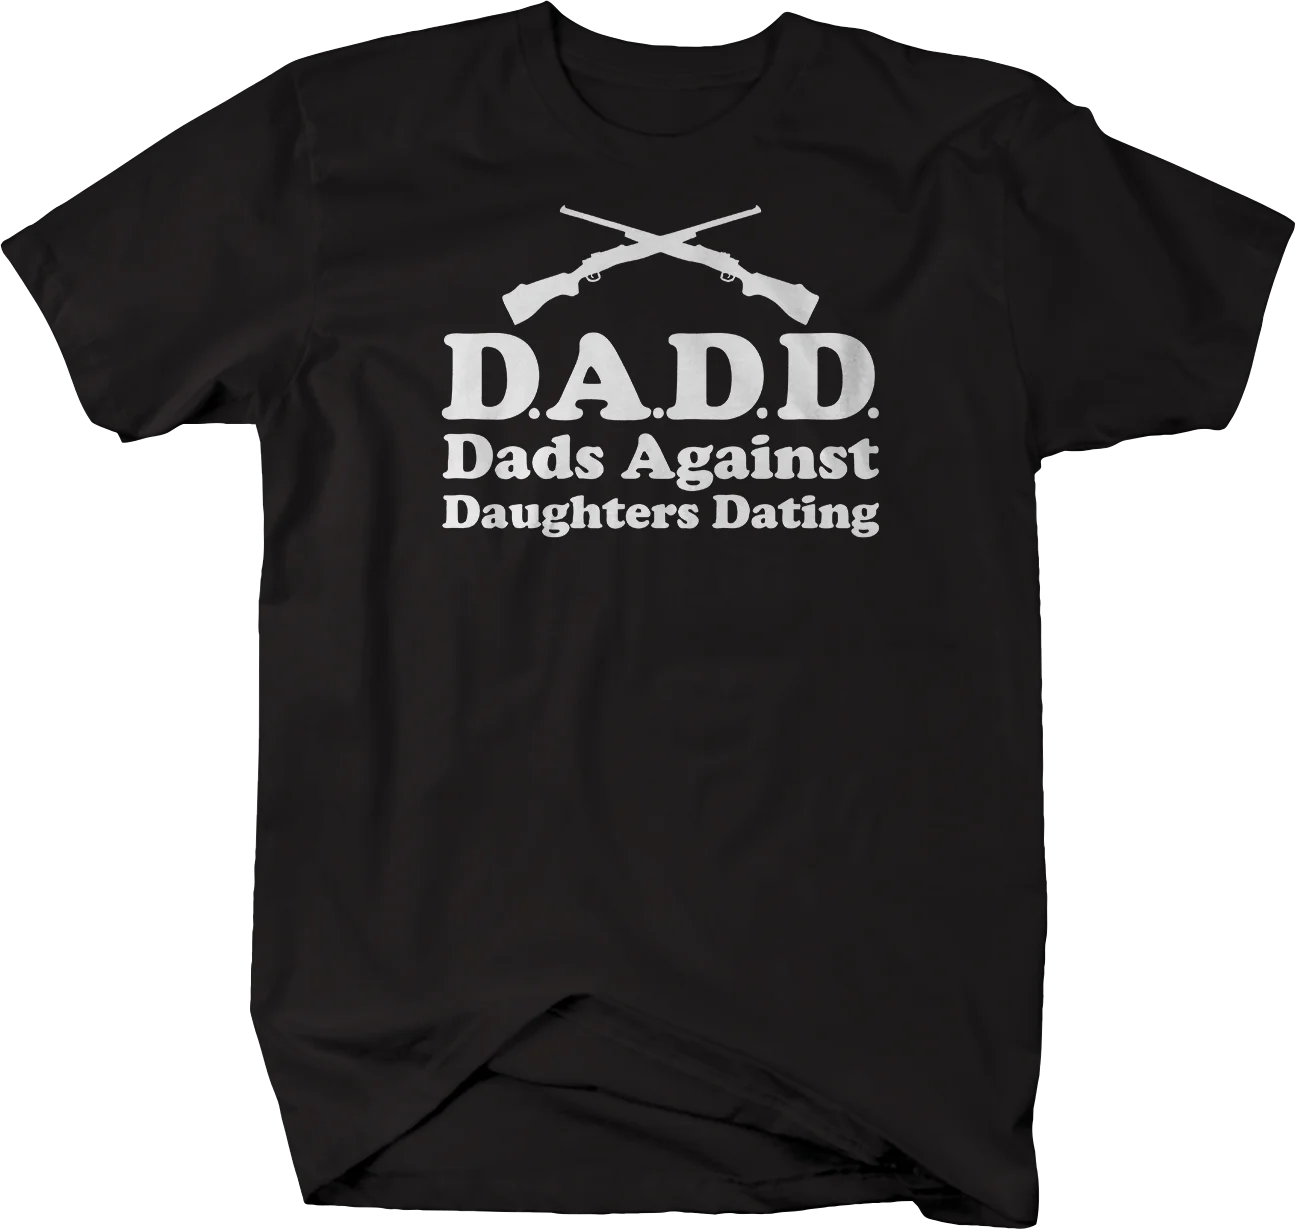 

DADD Dads Against Daughters Dating Crossed Rifles T-Shirt Summer Cotton O-Neck Short Sleeve Men's T Shirt Size S-3XL